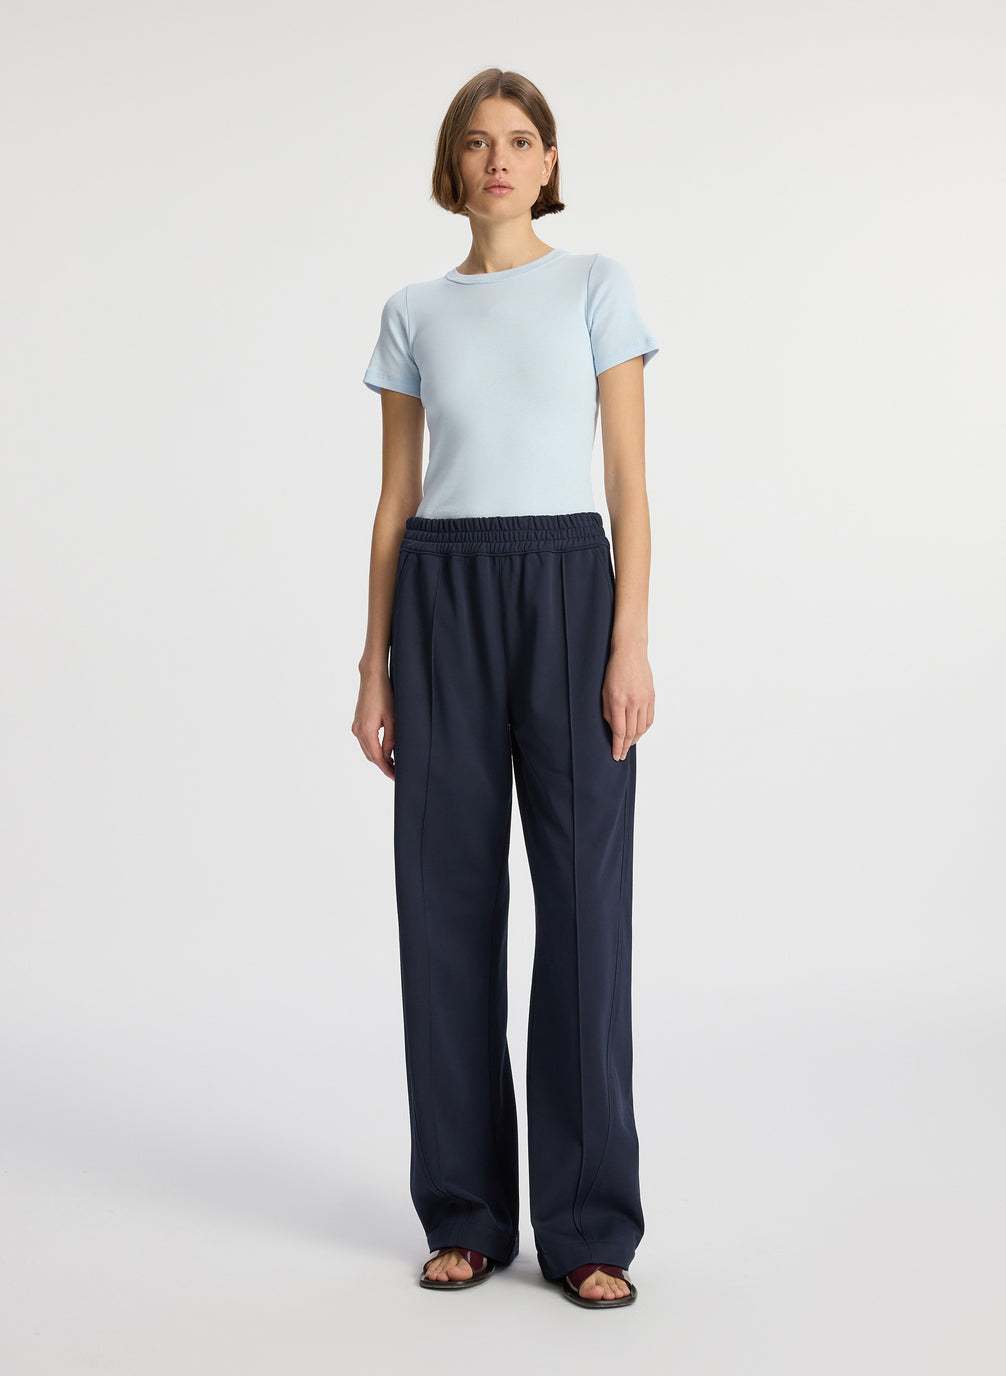 front view of woman wearing light blue tshirt and navy blue pants